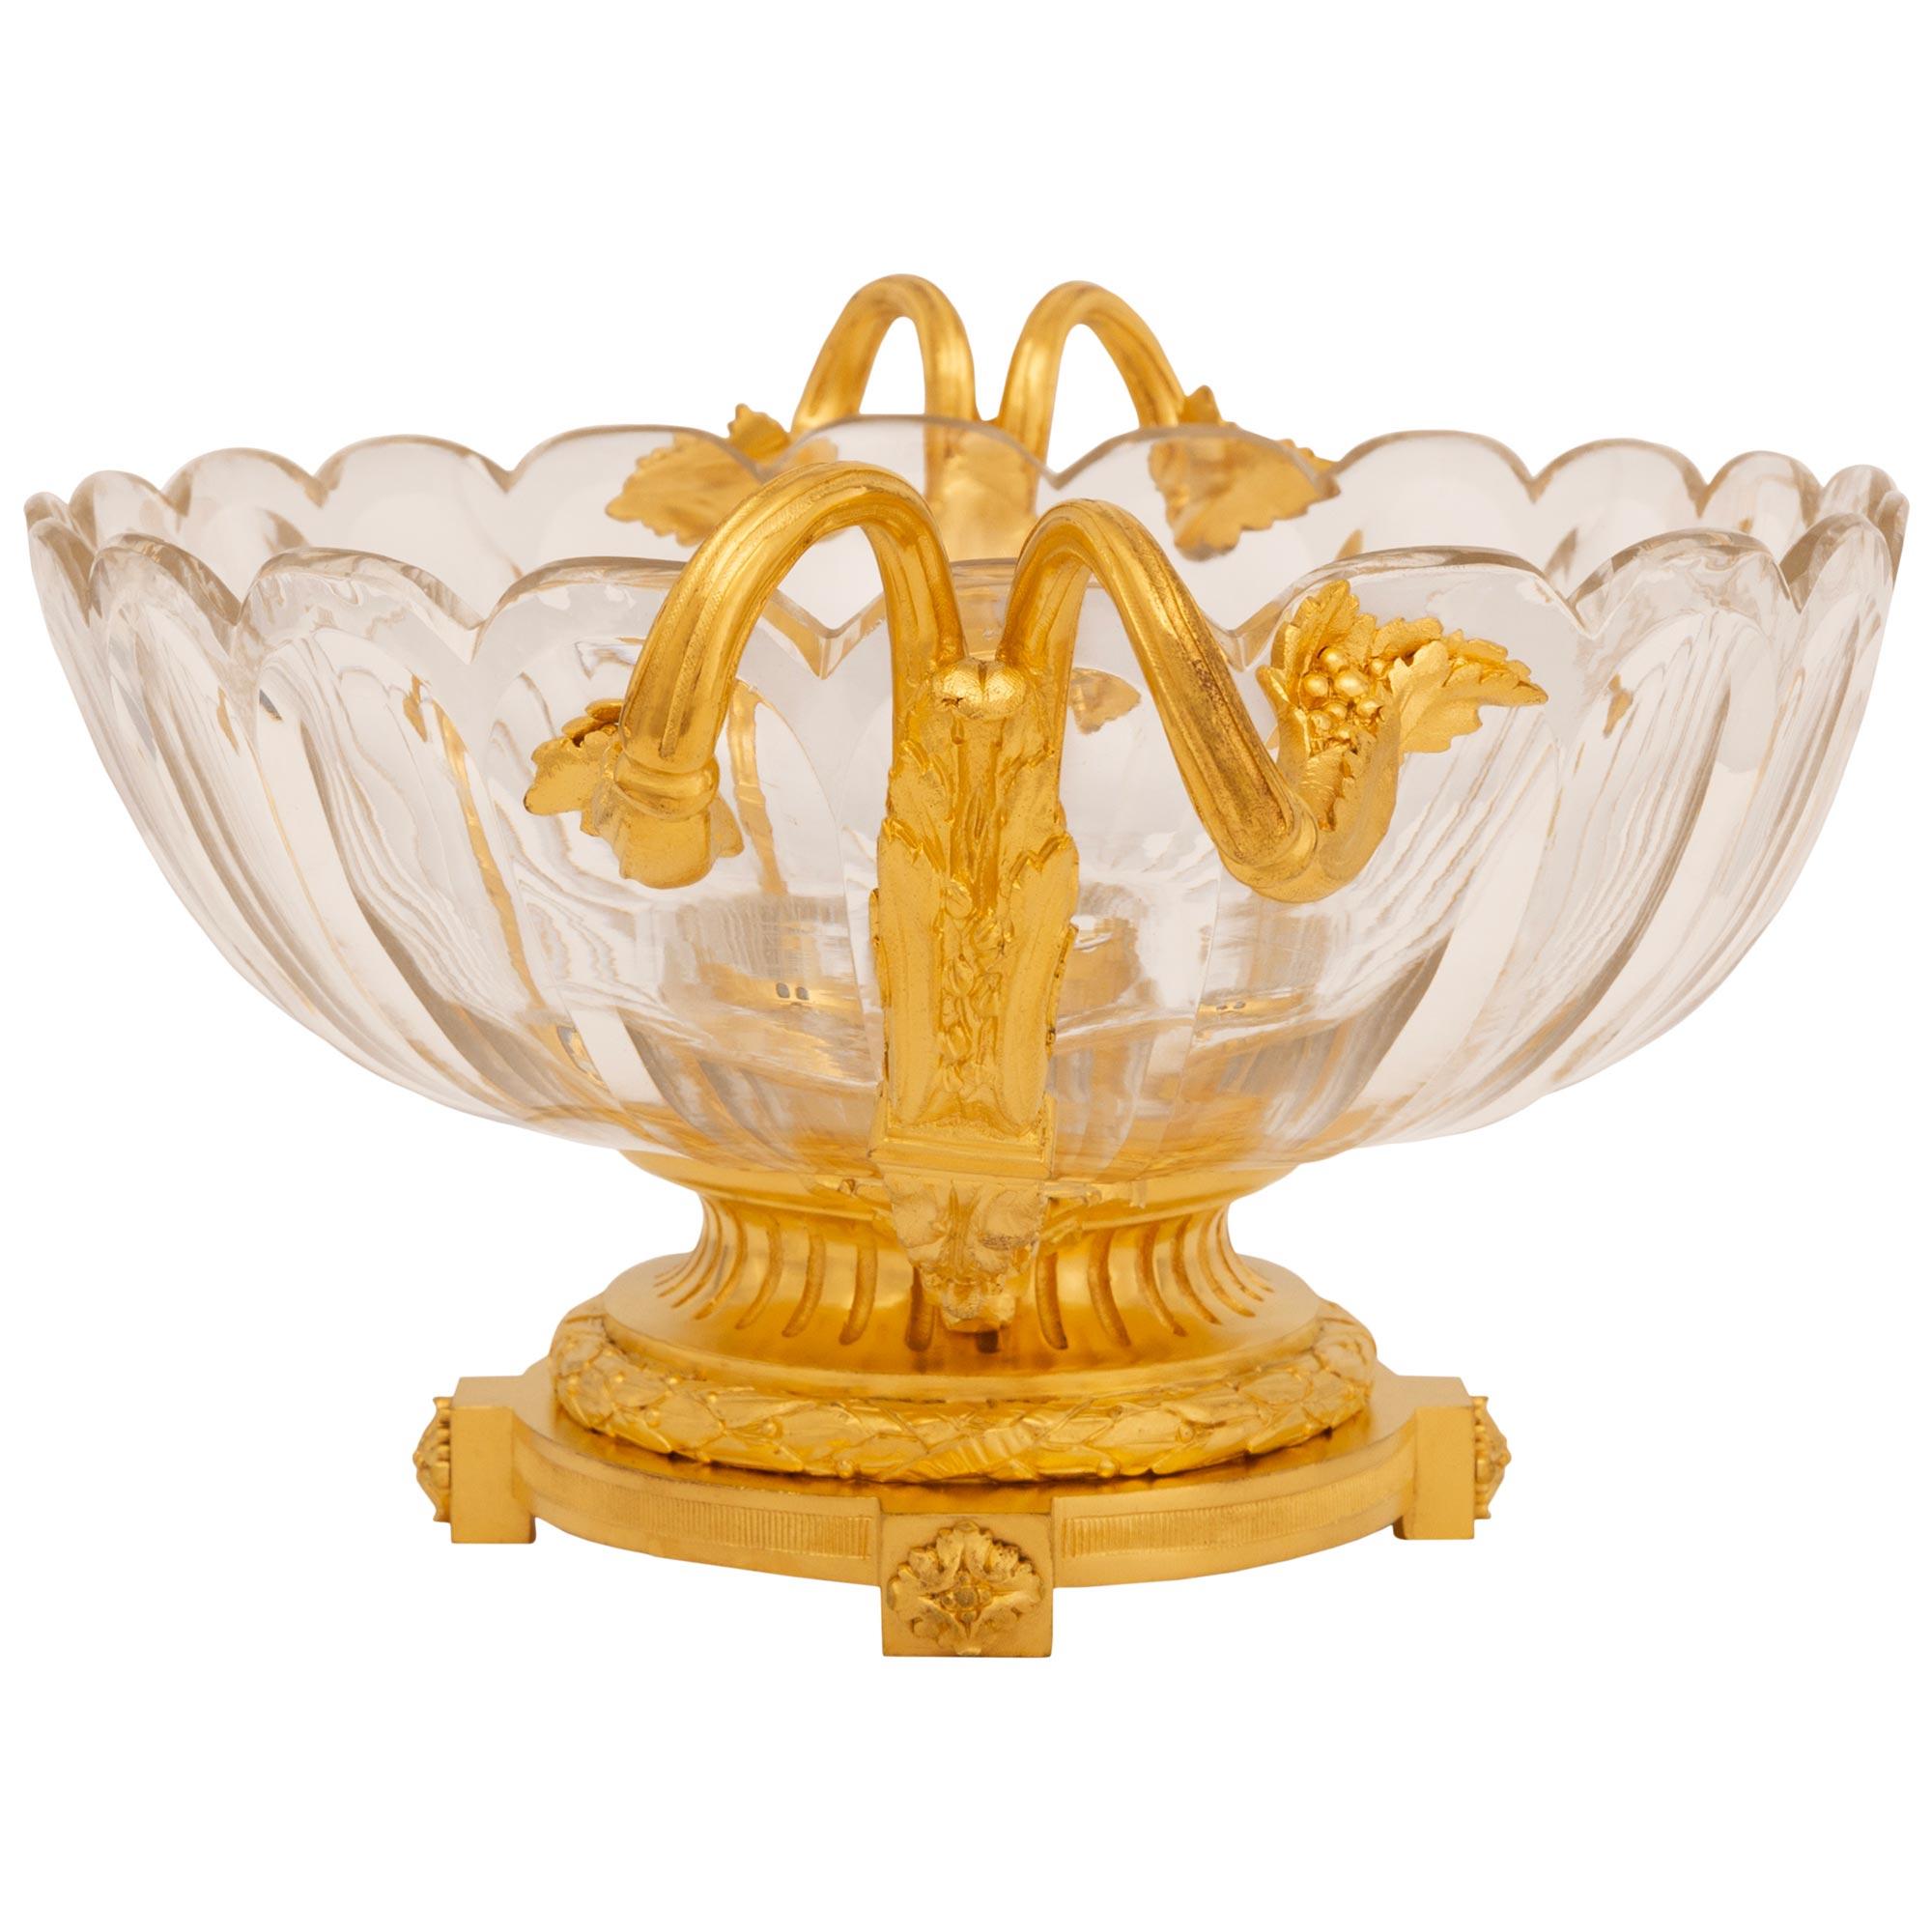 French 19th Century Belle Epoque Period Ormolu And Baccarat Crystal Centerpiece For Sale 1